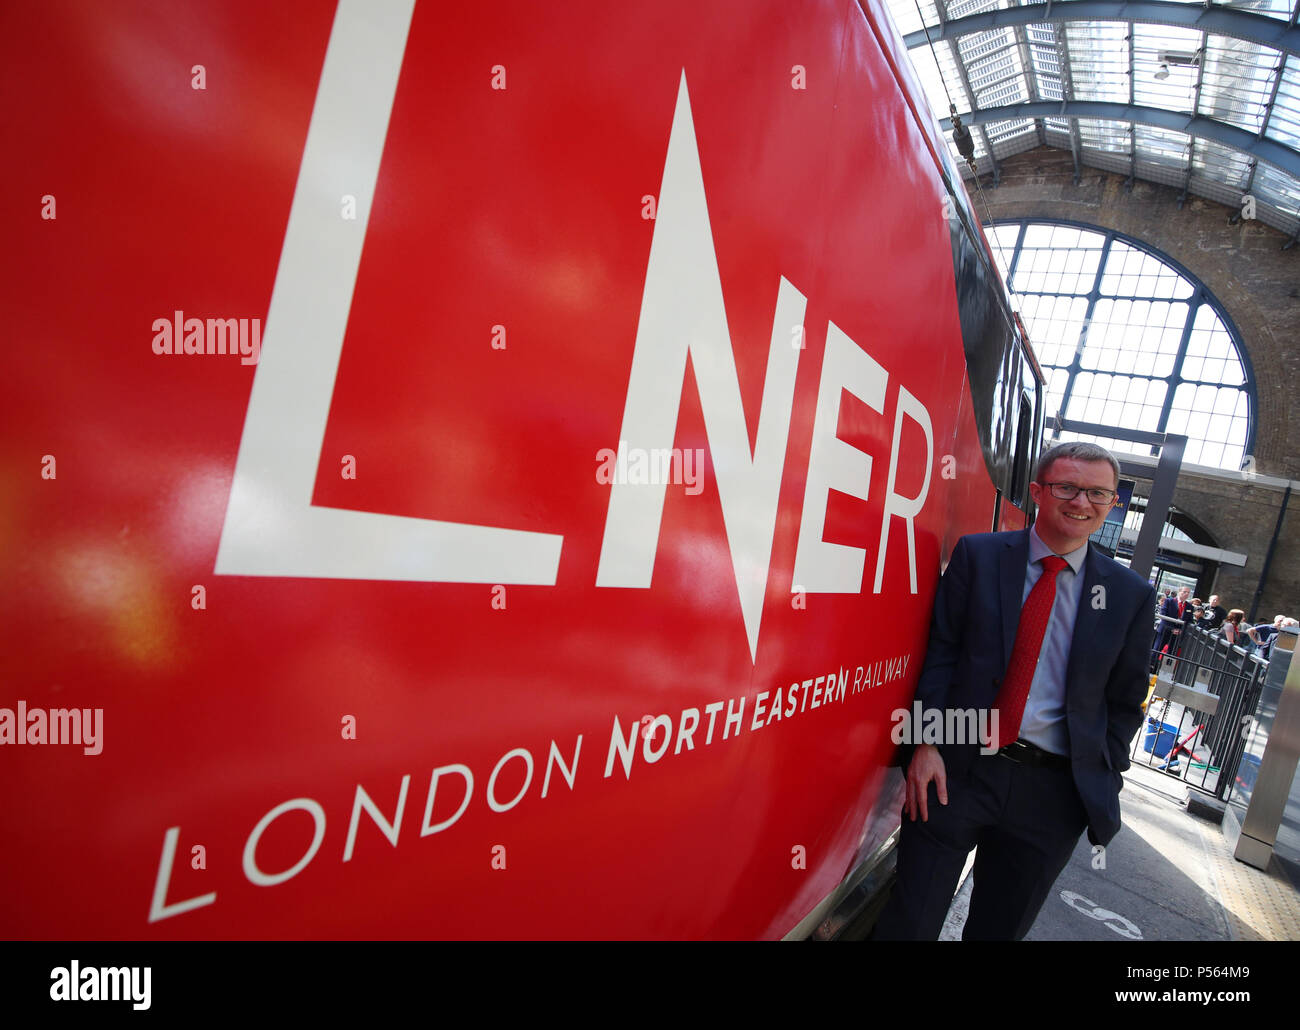 David Horne, former boss of failed rail franchise Virgin Trains East Coast (VTEC) and now managing director of nationalised operator London North Eastern Railway (LNER) during the launch event for the new service at Kings Cross station in London. Stock Photo